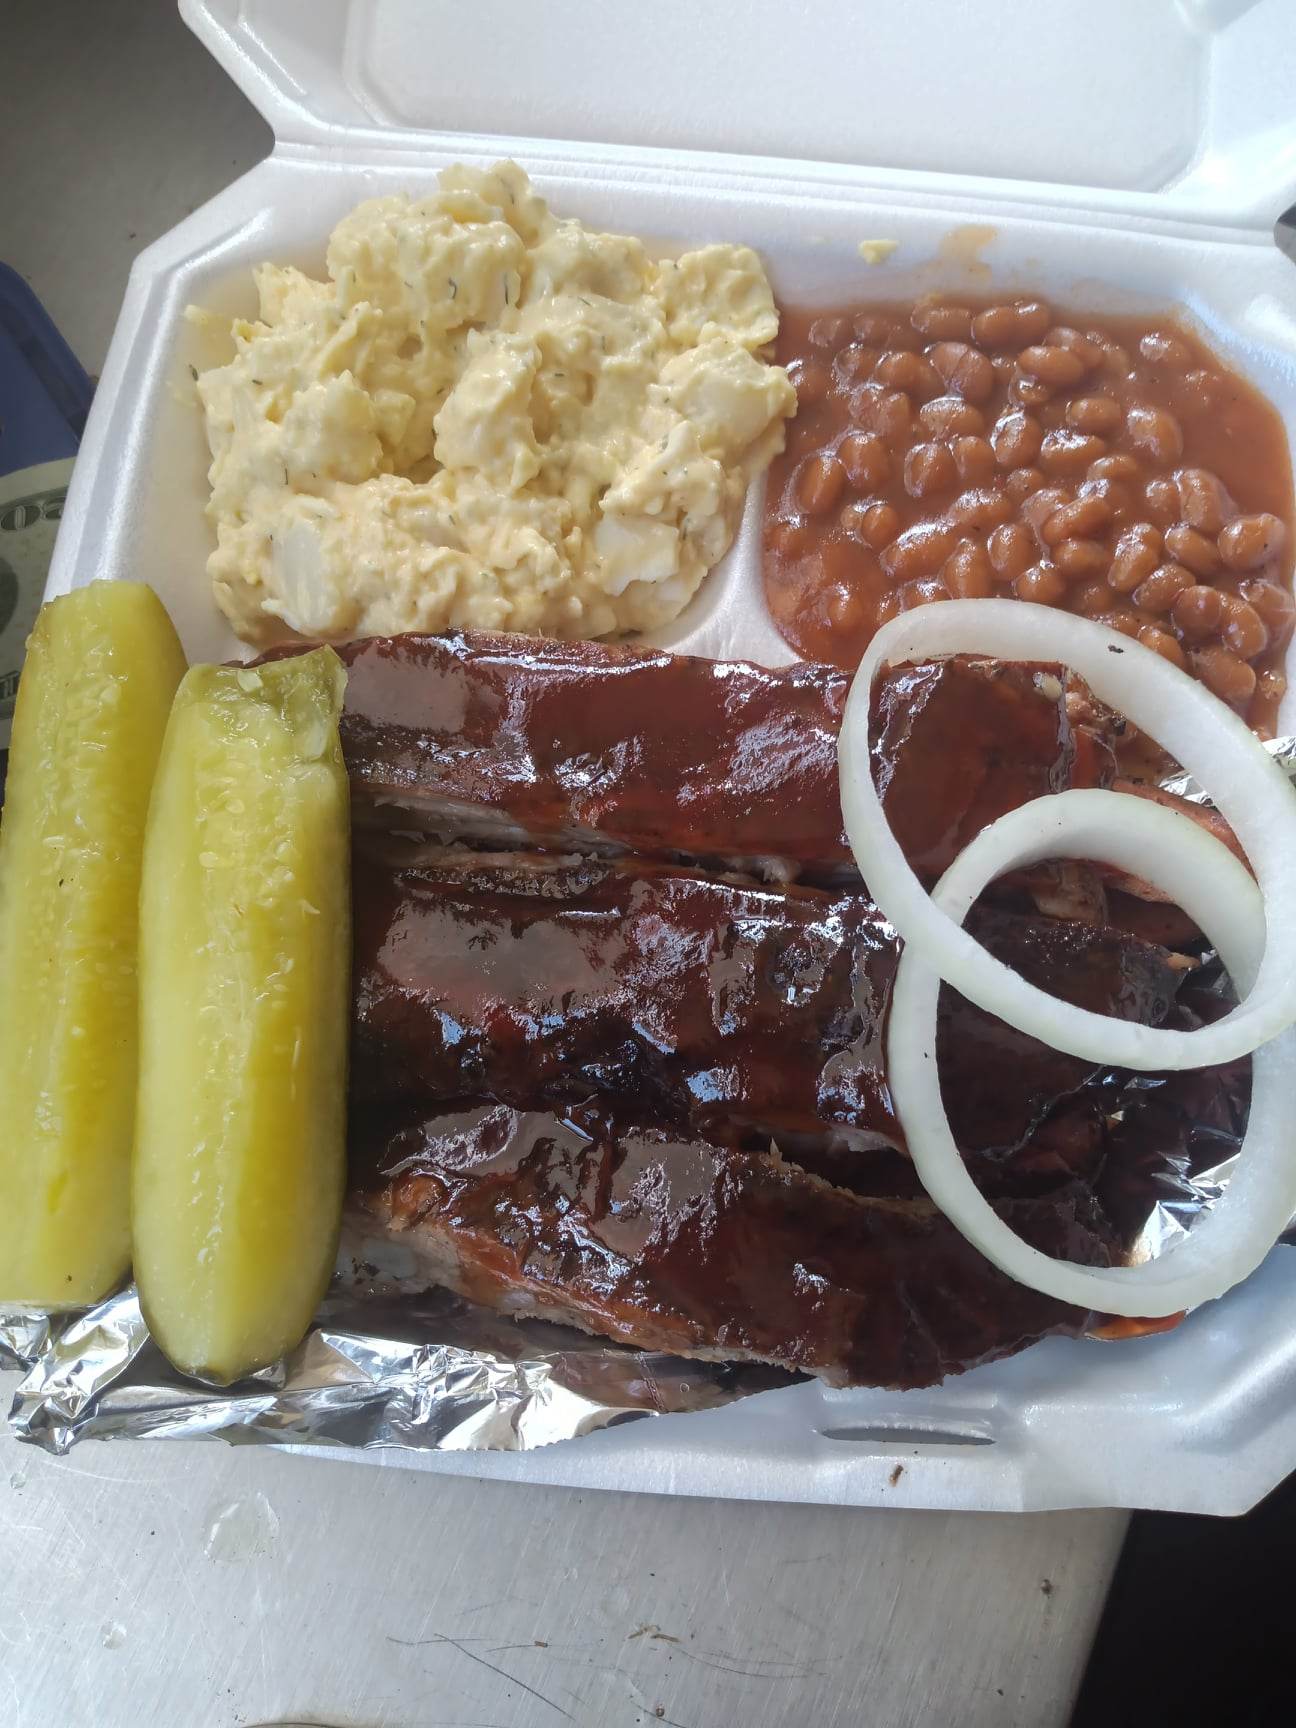 THE 1 MEAT BBQ PLATE